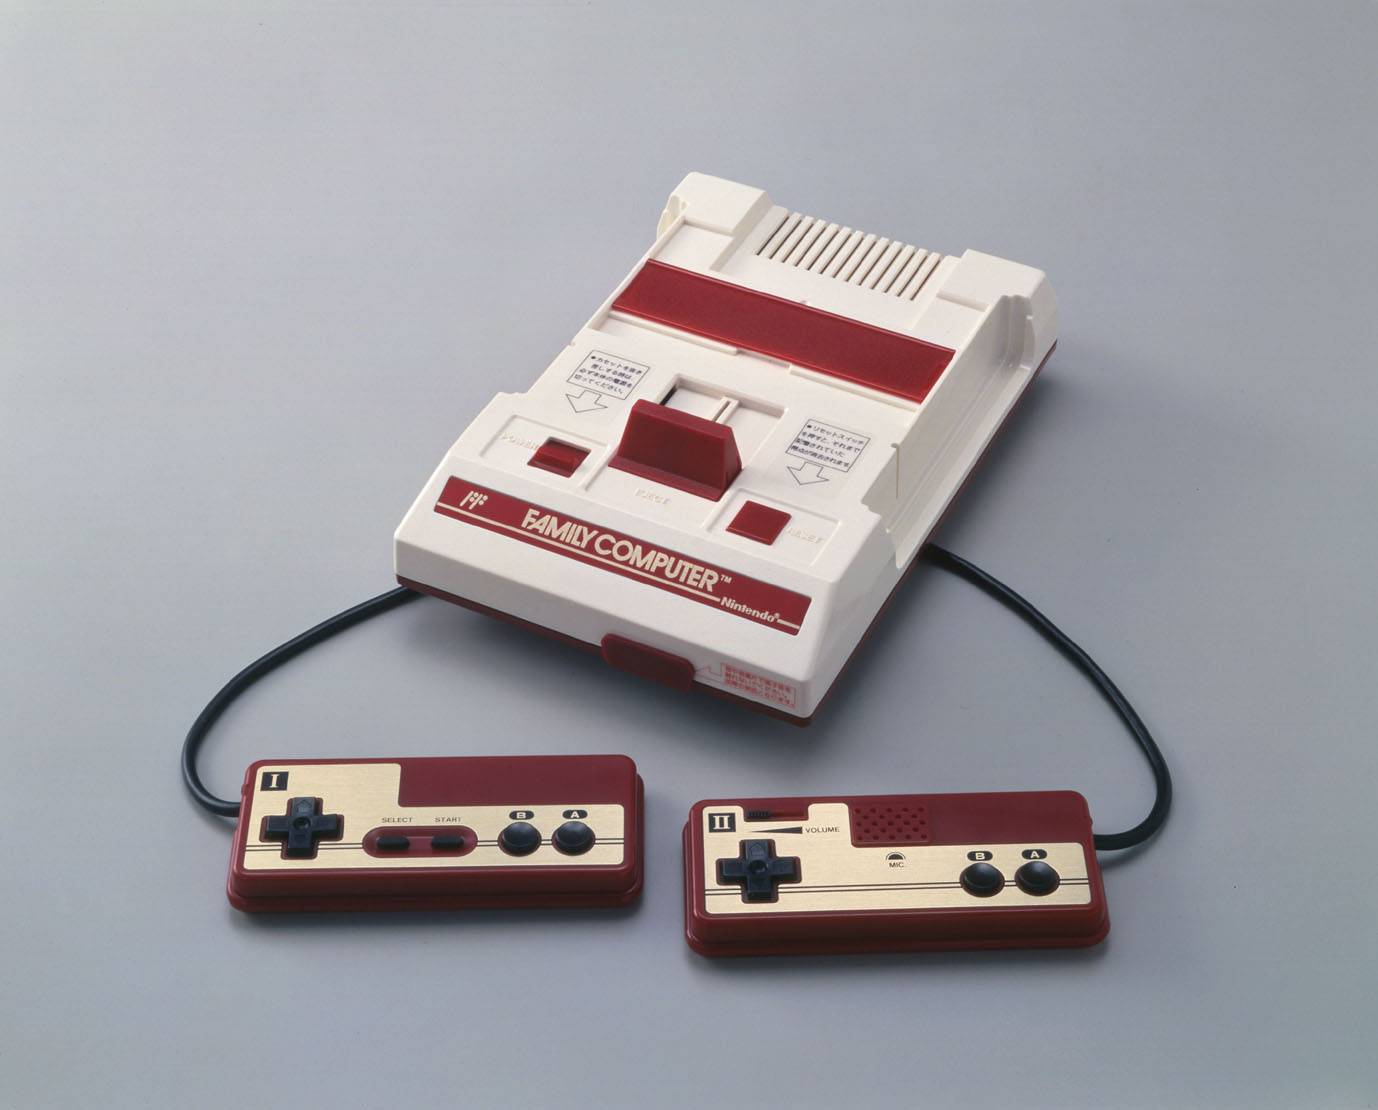 Nintendo's Famicom game console 40th anniversary - Japan Times